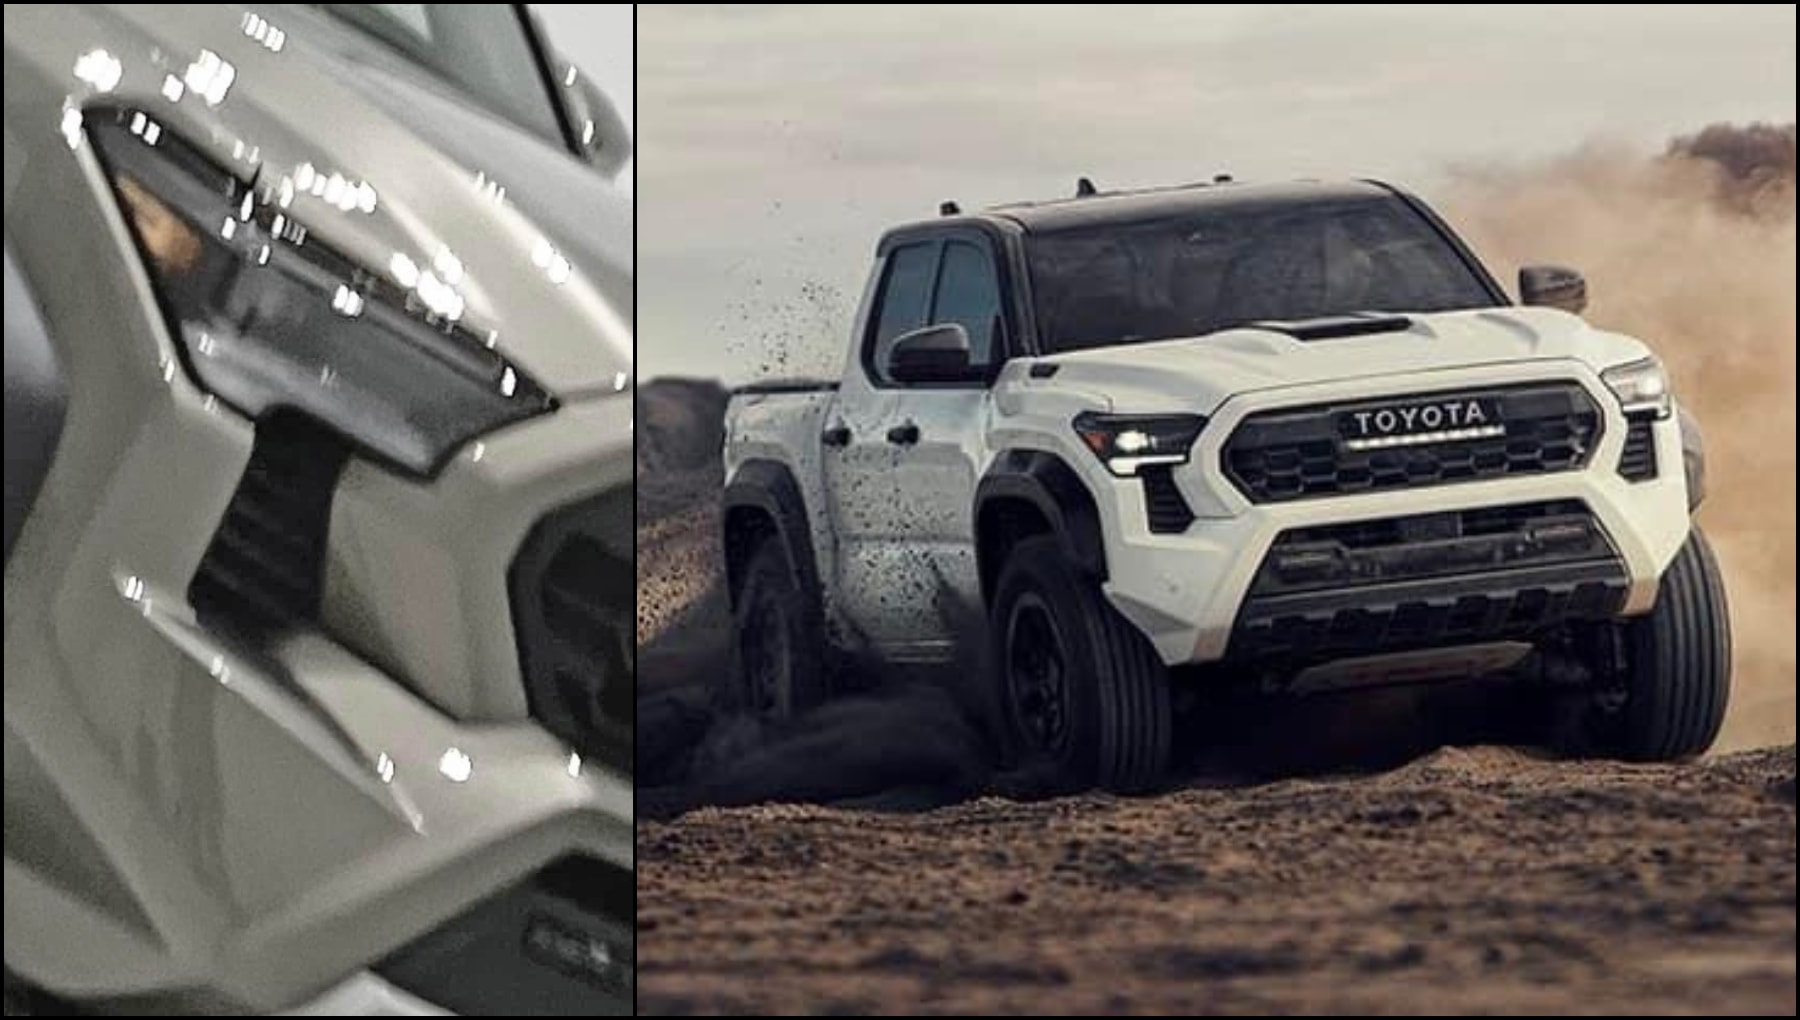 2024 Toyota Tacoma Leaked Photos Reveal Trd Pro Trim Level With Black Hood Scoop 214652 1 